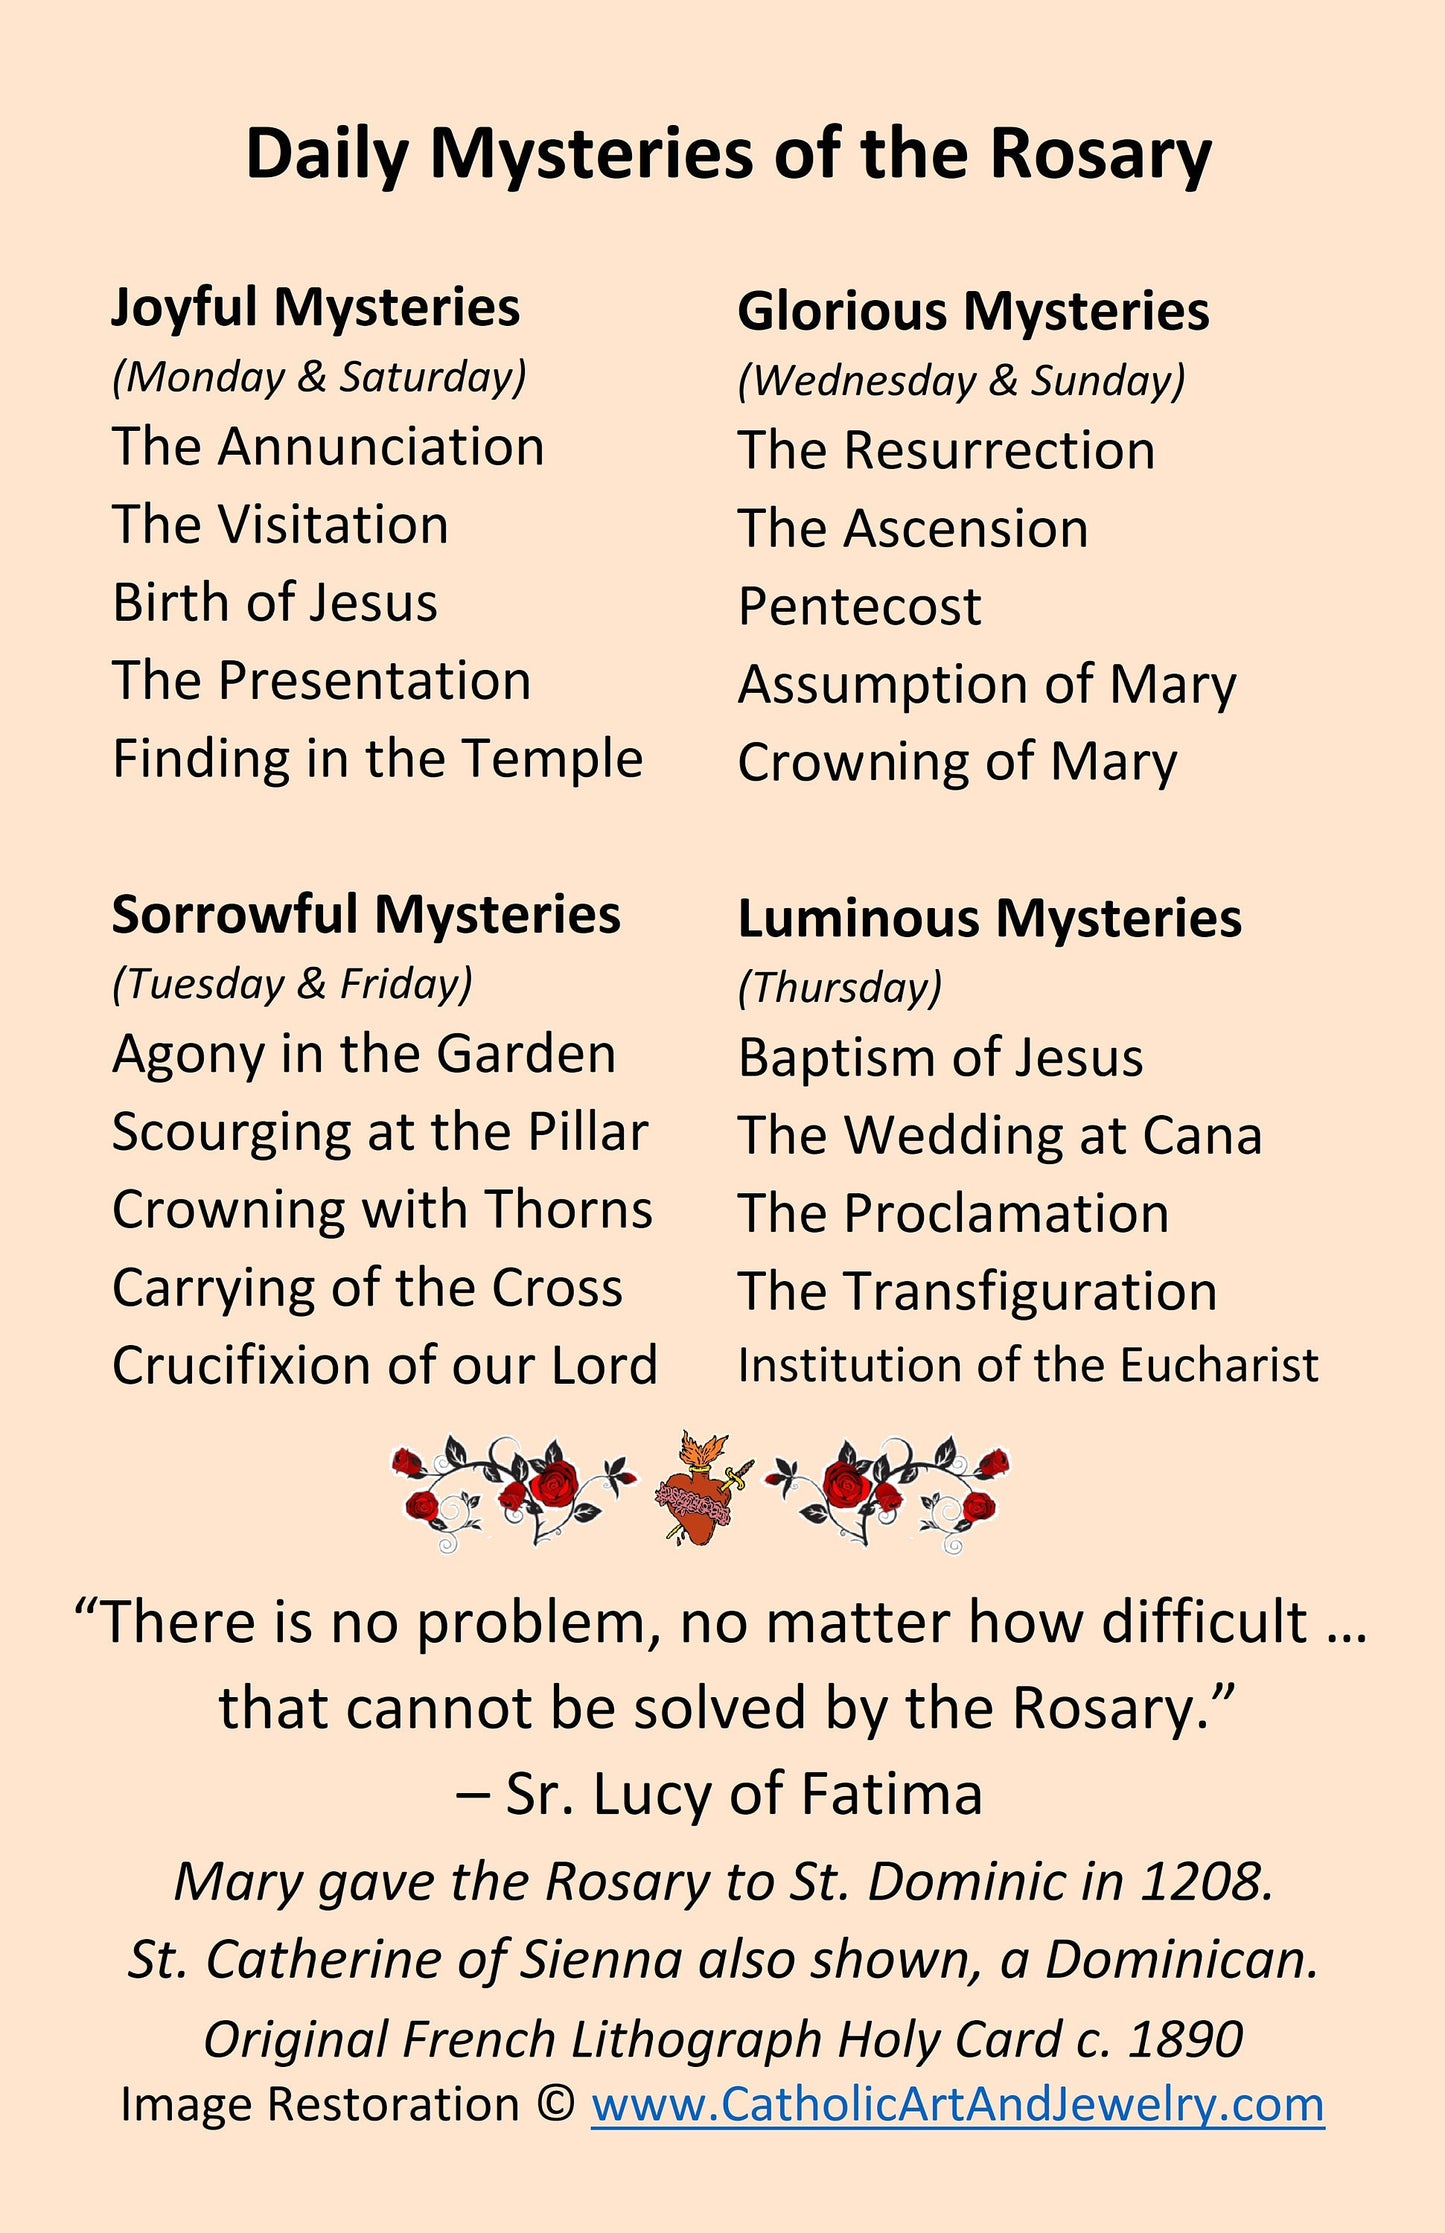 New! Daily Mysteries of the Rosary – pack of 10/100/1000 – Madonna and Child Holy Card